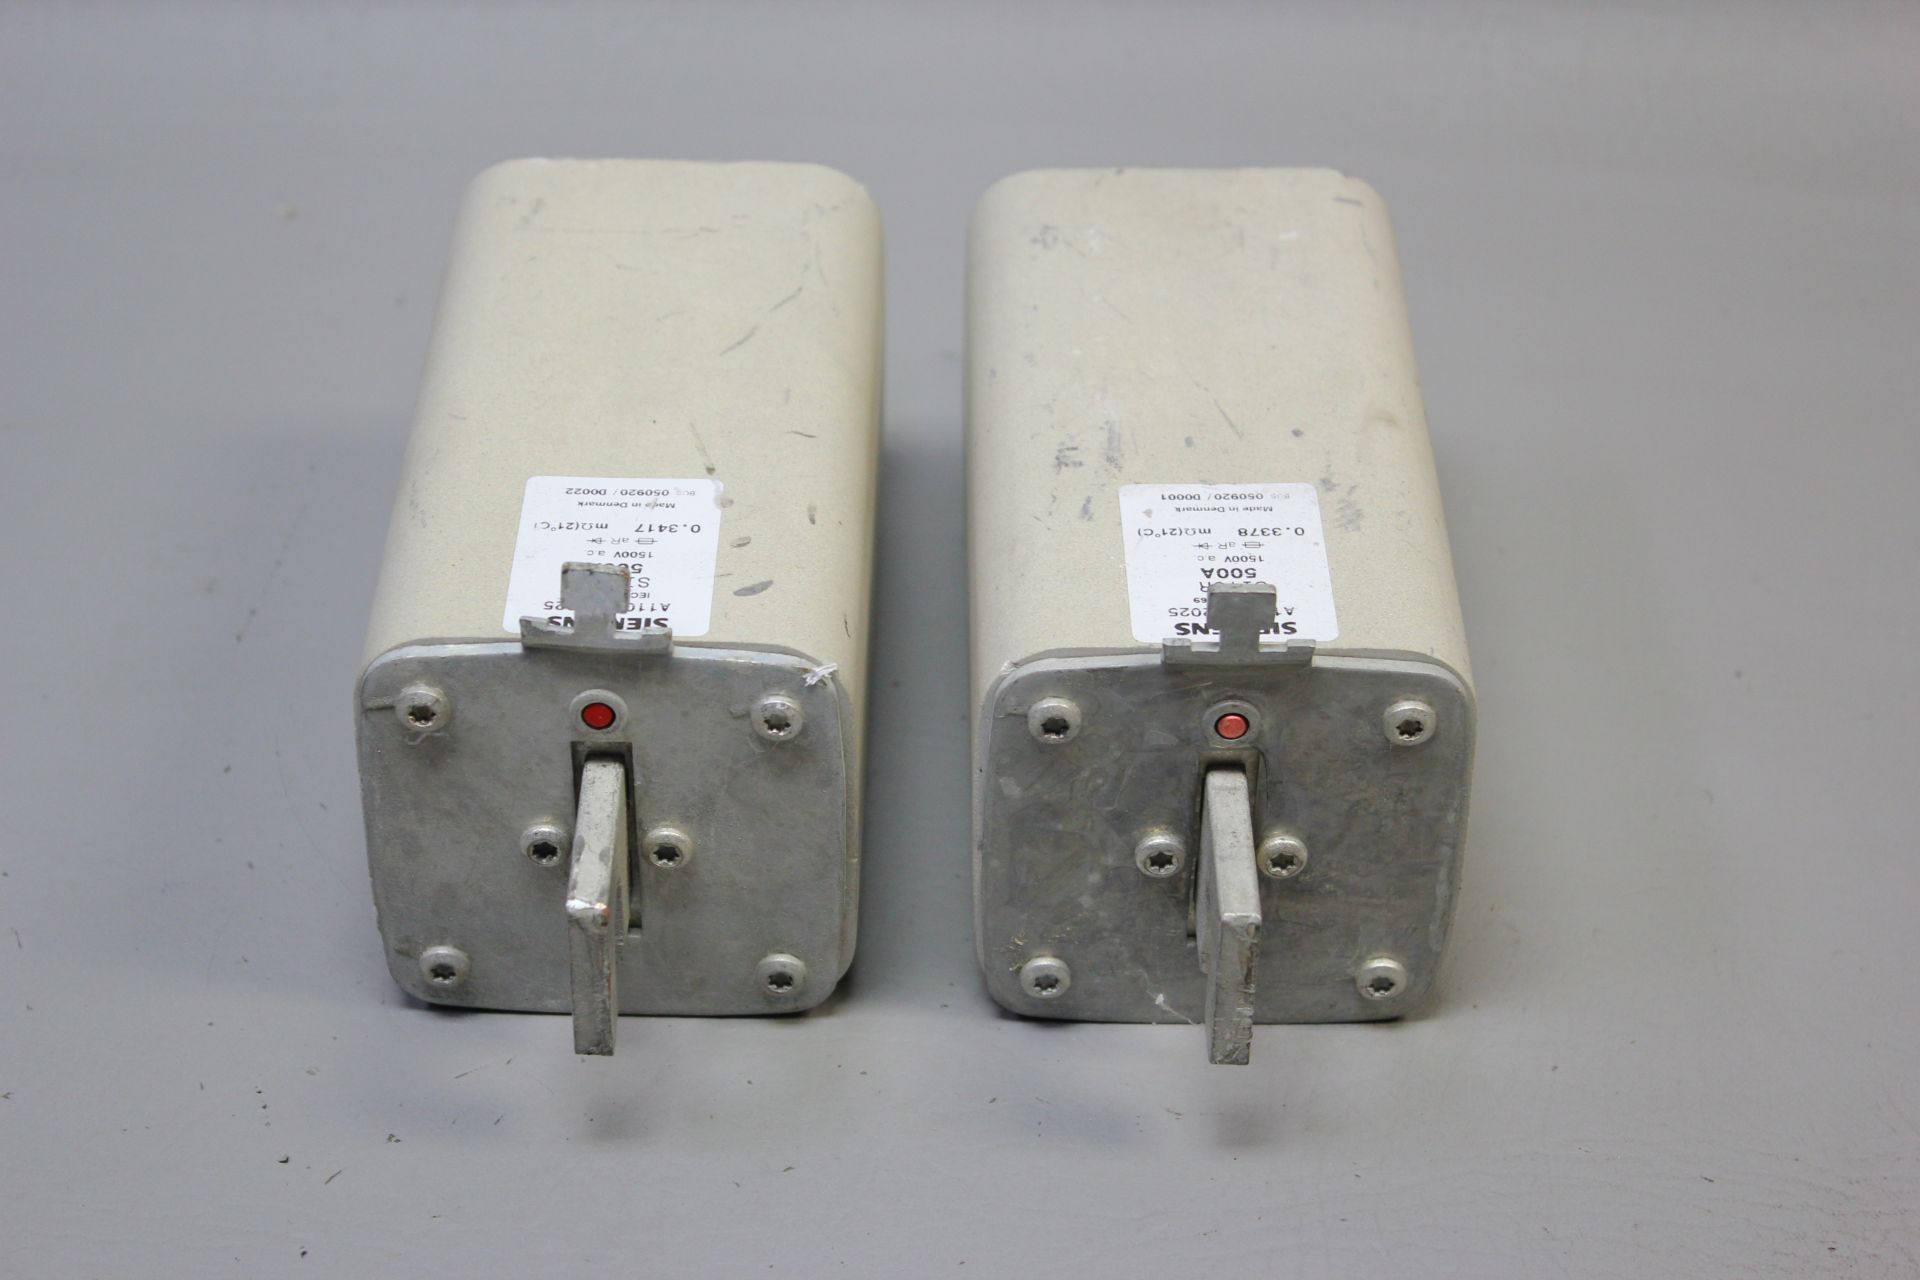 LOT OF 2 SIEMENS SITOR 500A SEMICONDUCTOR FUSES - Image 3 of 3